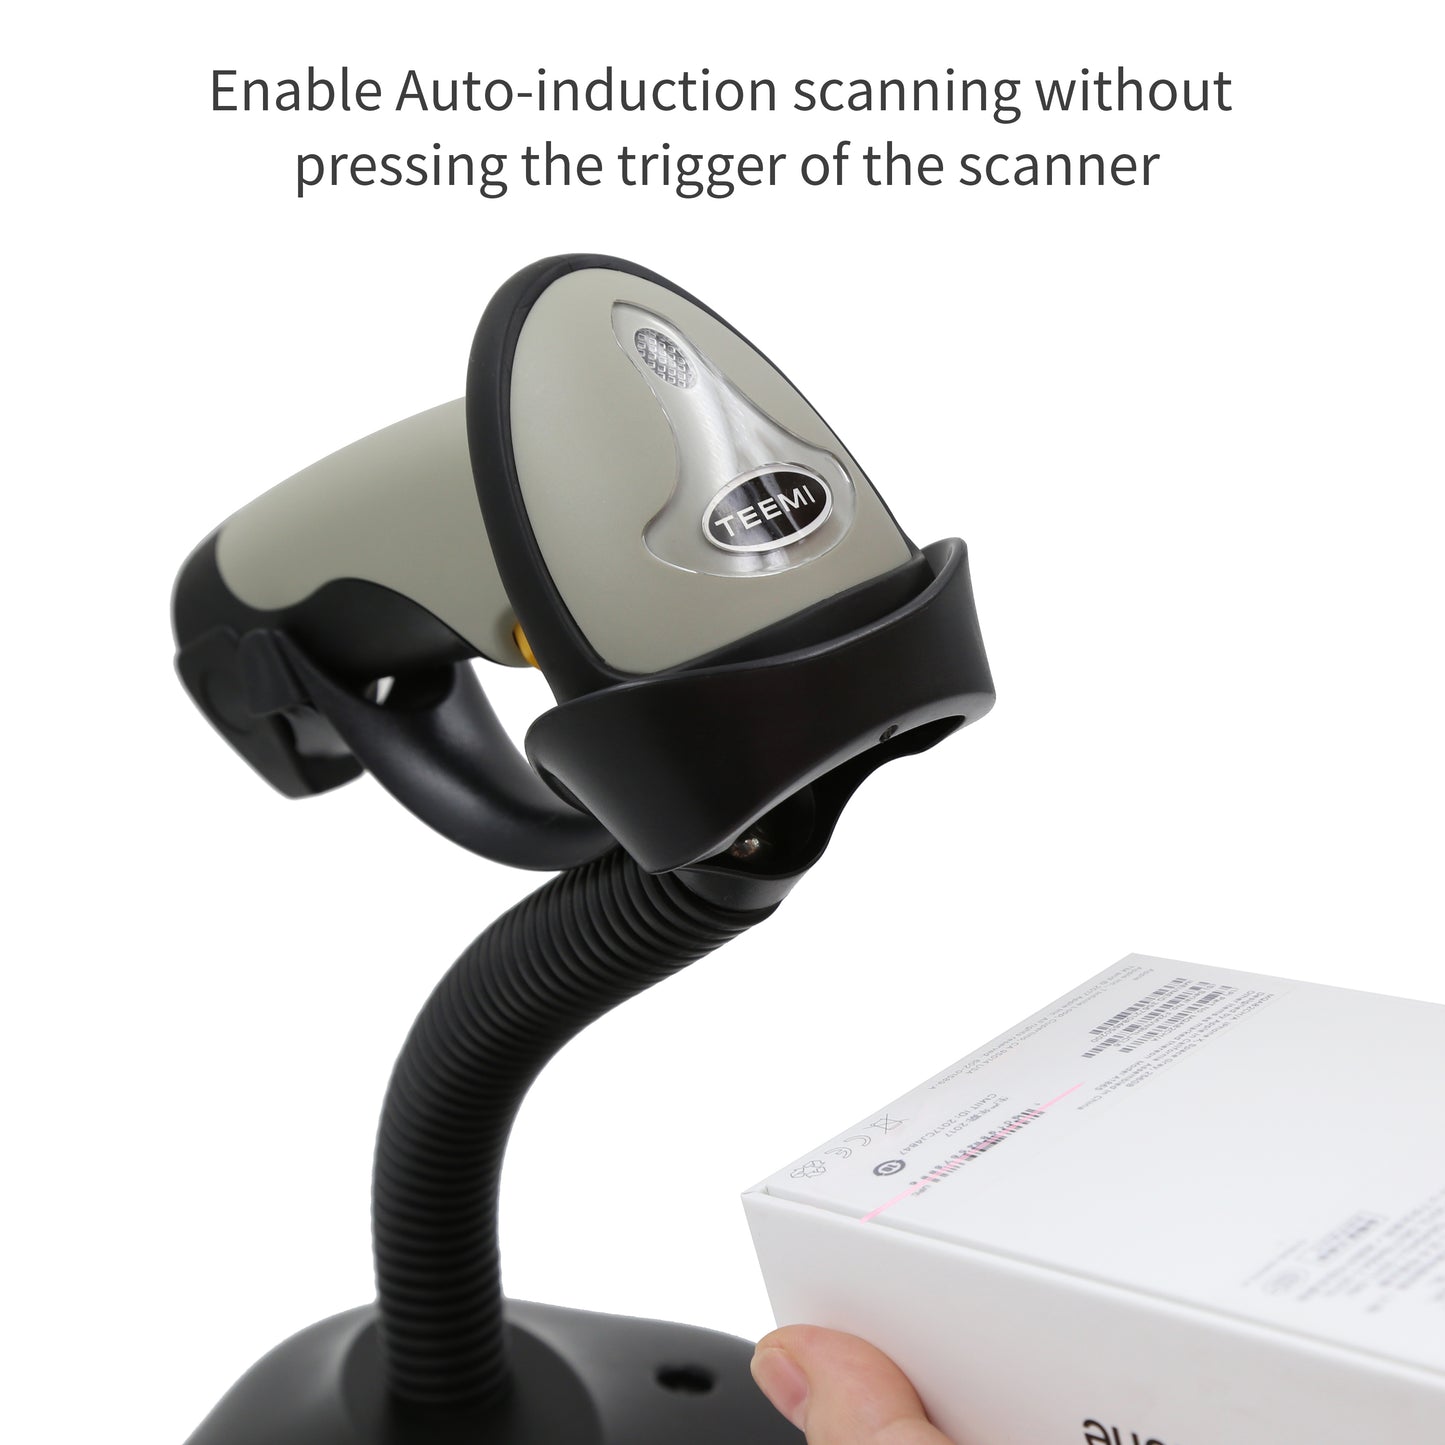 TEEMI TMCT-10 Bluetooth Barcode Scanner with Stand, 1d Laser Handheld Automatic Bar Code Reader for iPhone iPad Android Tablet PC, Mac OS X, Android, Windows and iOS, Stand included